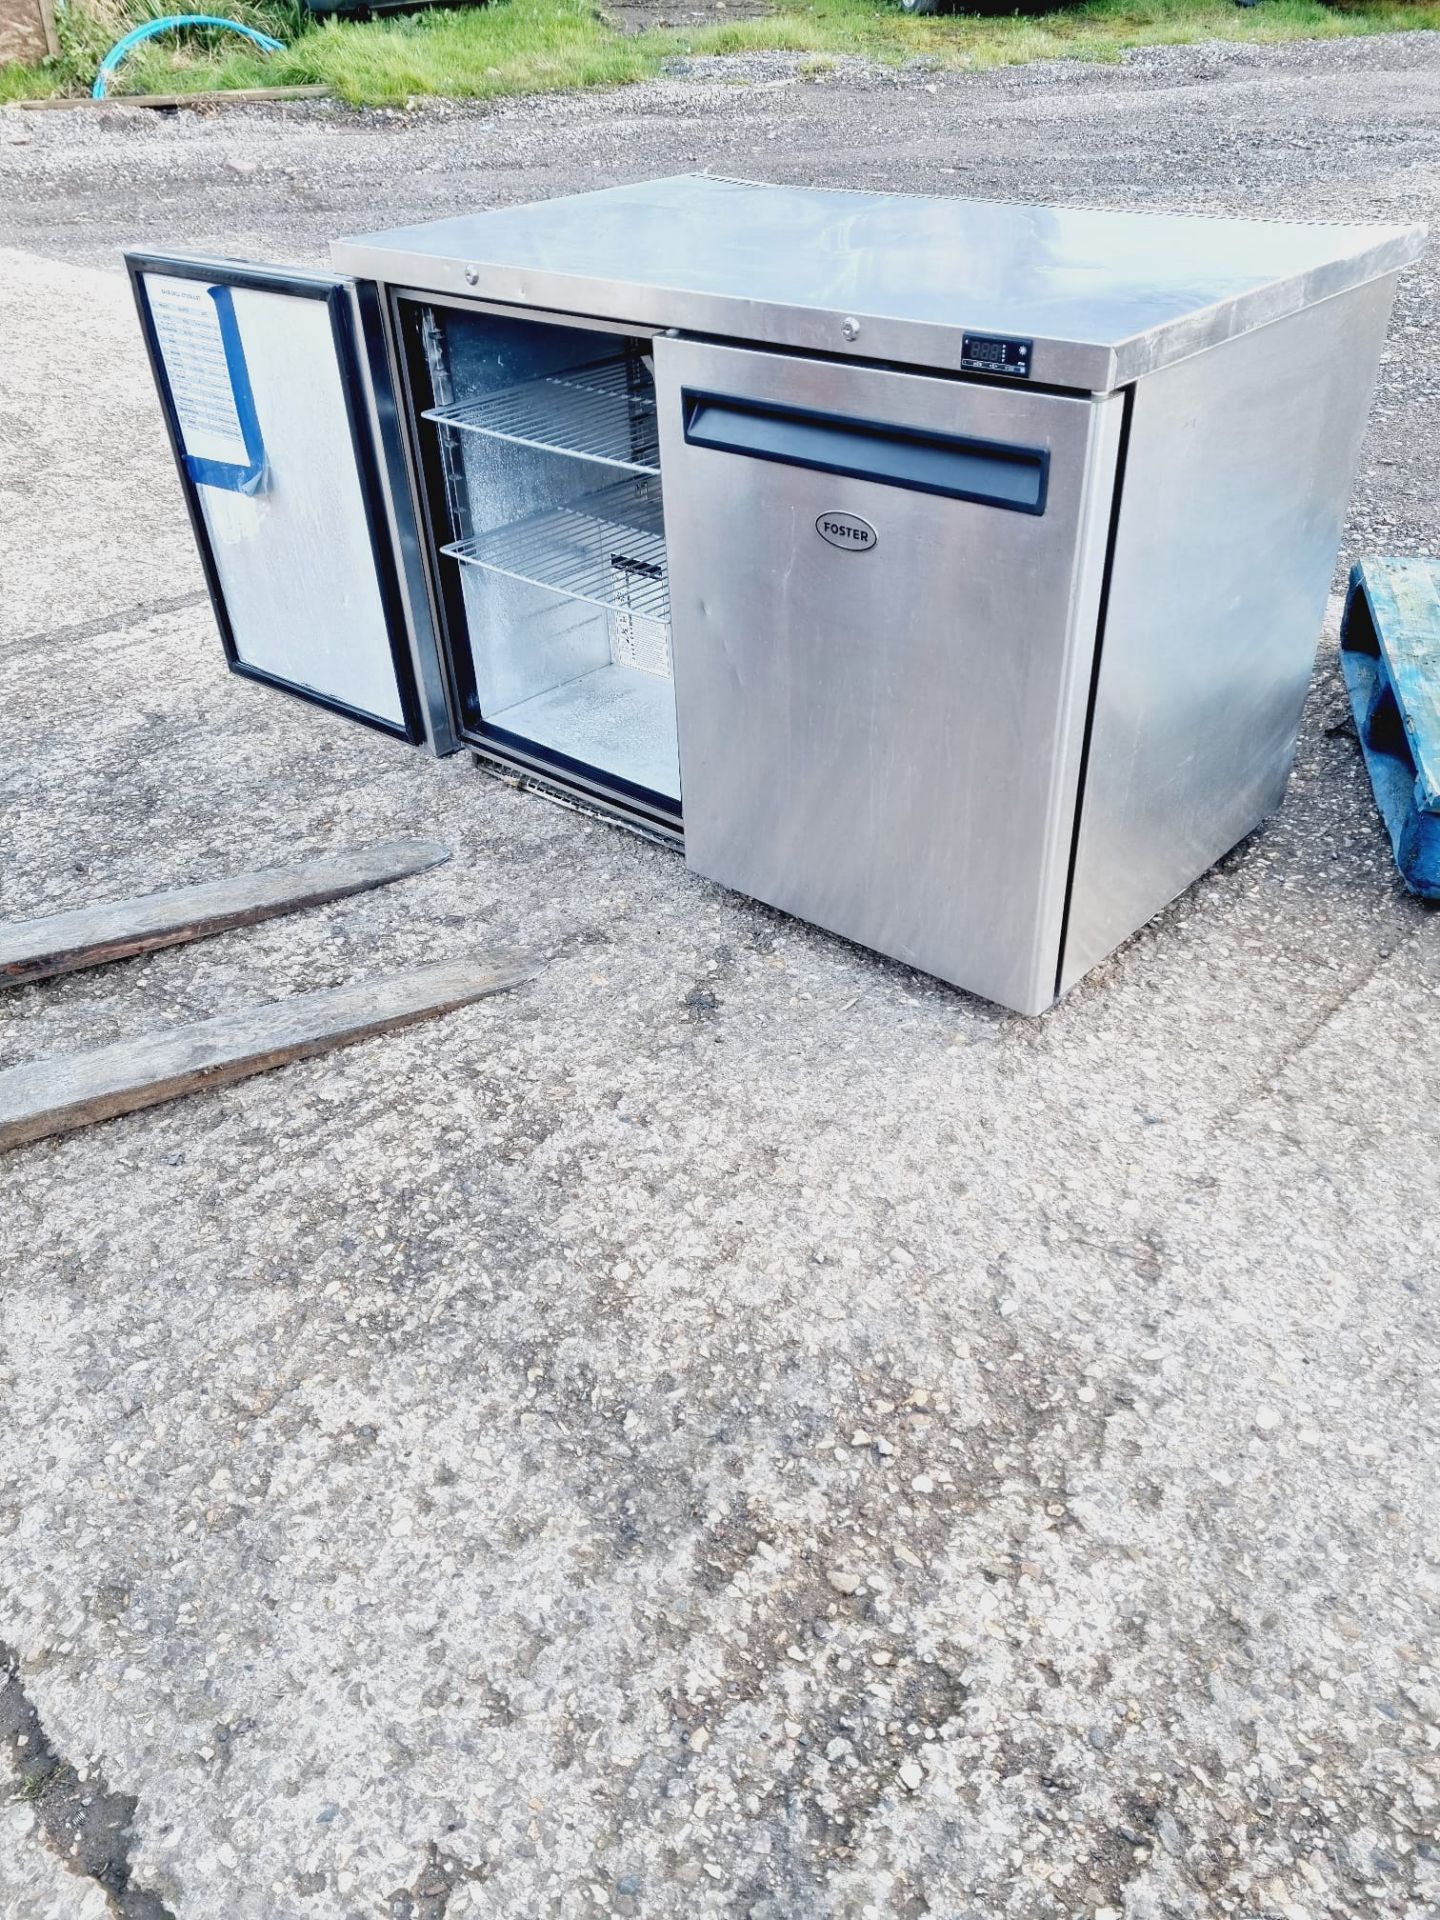 FOSTER HR360 DOUBLE DOOR FRIDGE - YEAR 2022 - 1200 MM W AND 700 D - ALMOST NEW CONDITION  - Image 2 of 6